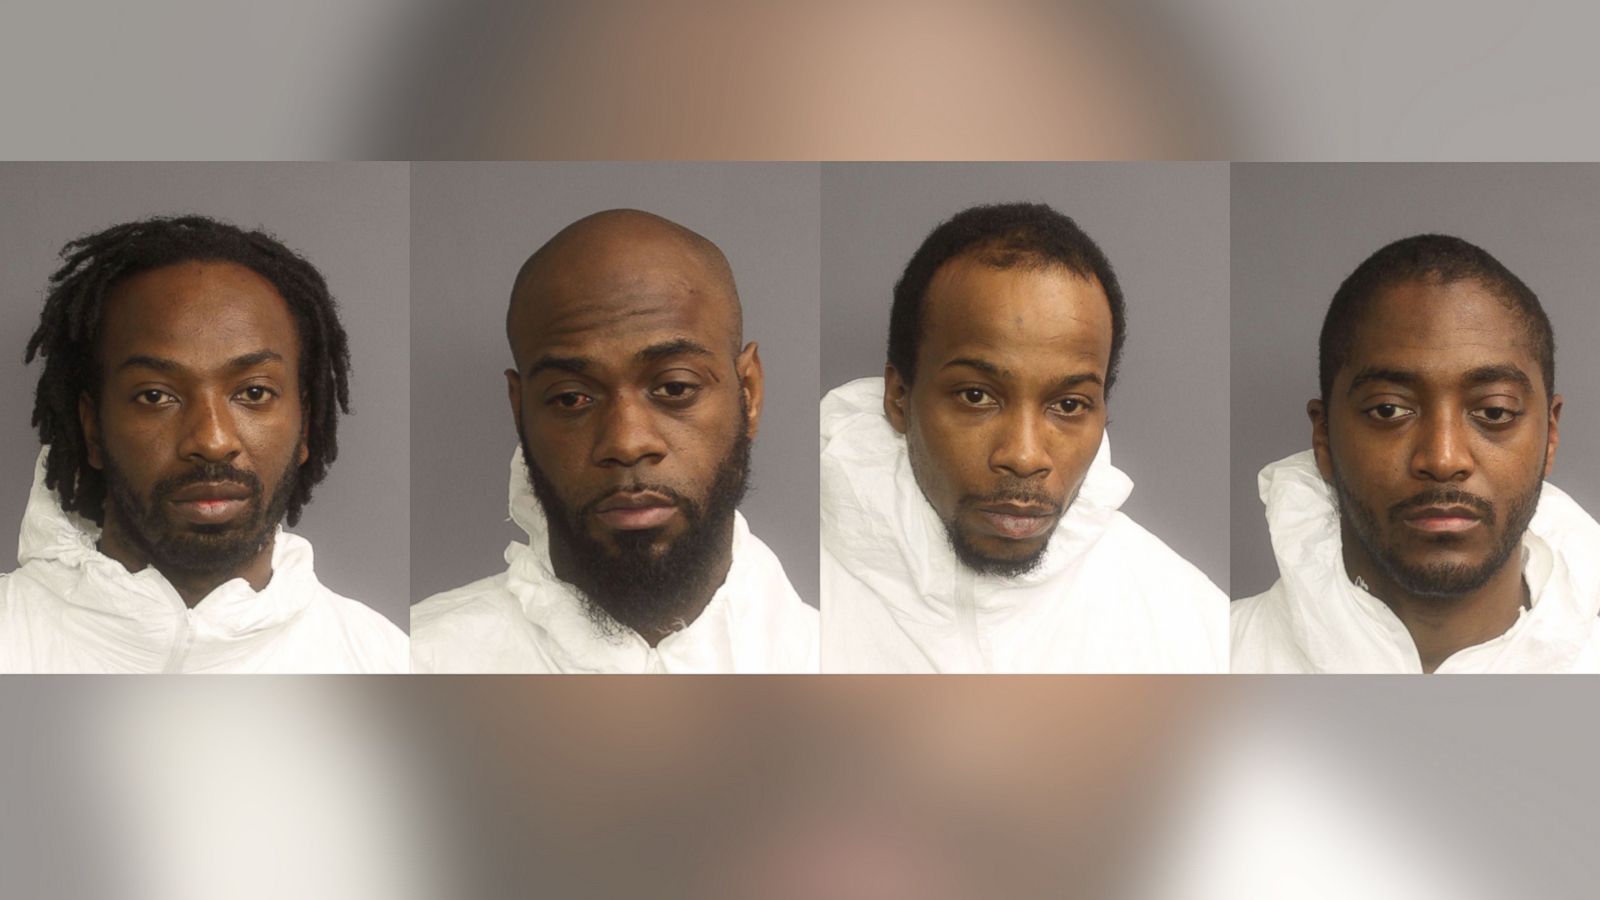 Newark, NJ - 4 Arrested On Murder Charges In Short Hills Mall